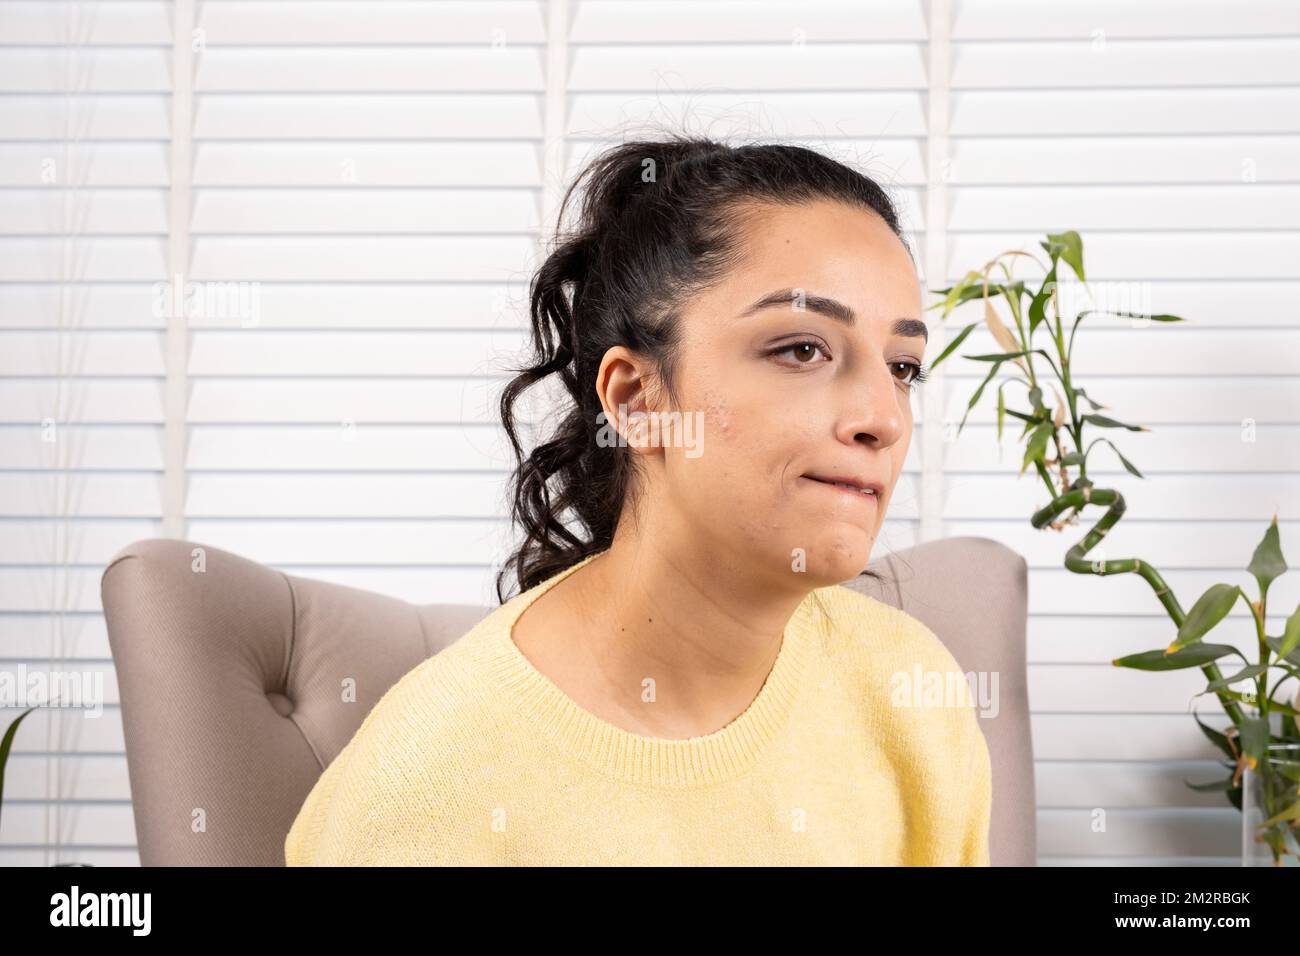 Sad woman, portrait of sad woman biting her lip. Pensive caucasian millennial female sitting on bergere in the living room. Pondering, thinking, lost. Stock Photo